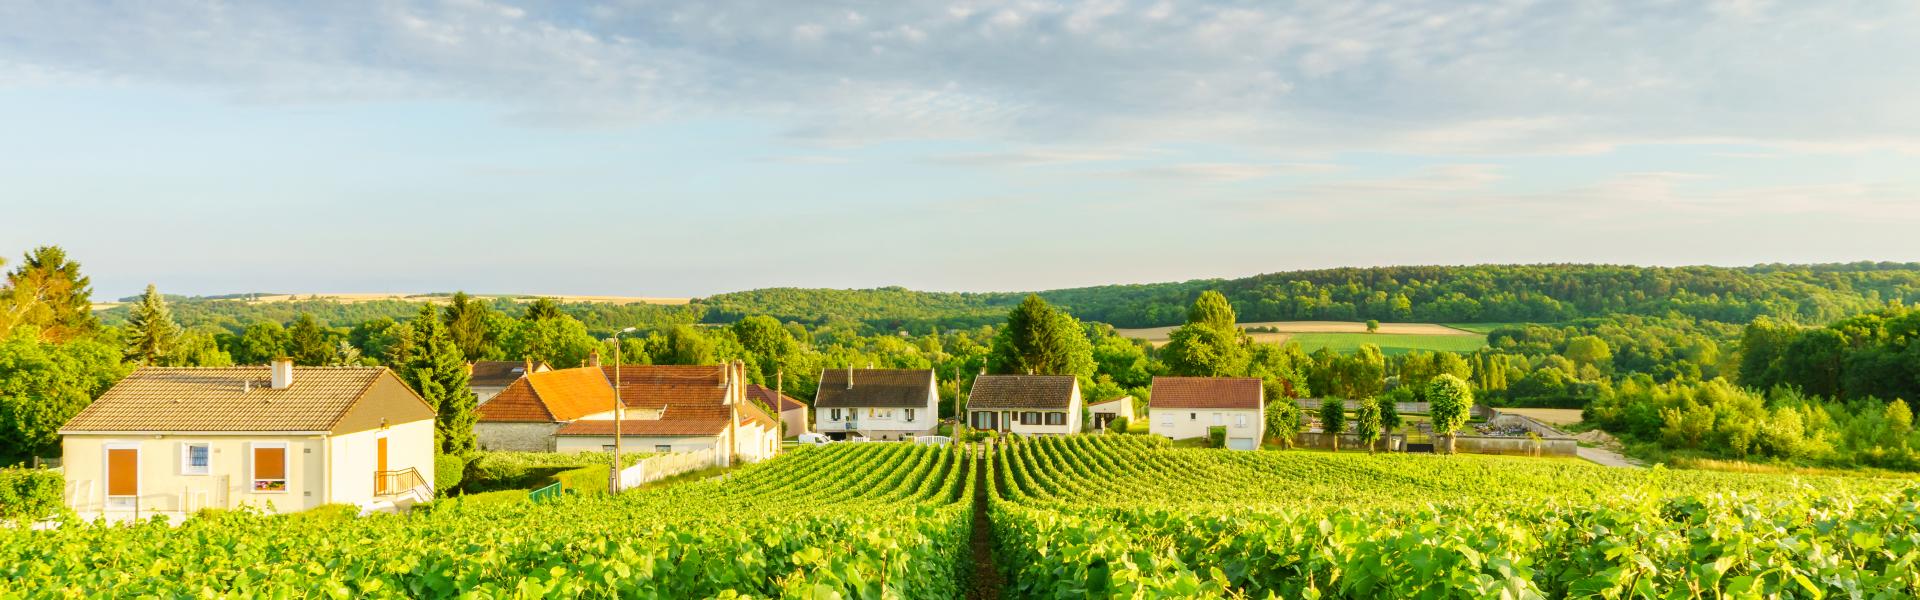 Row vine green grape in champagne vineyards at montagne de reims on countryside village background, France